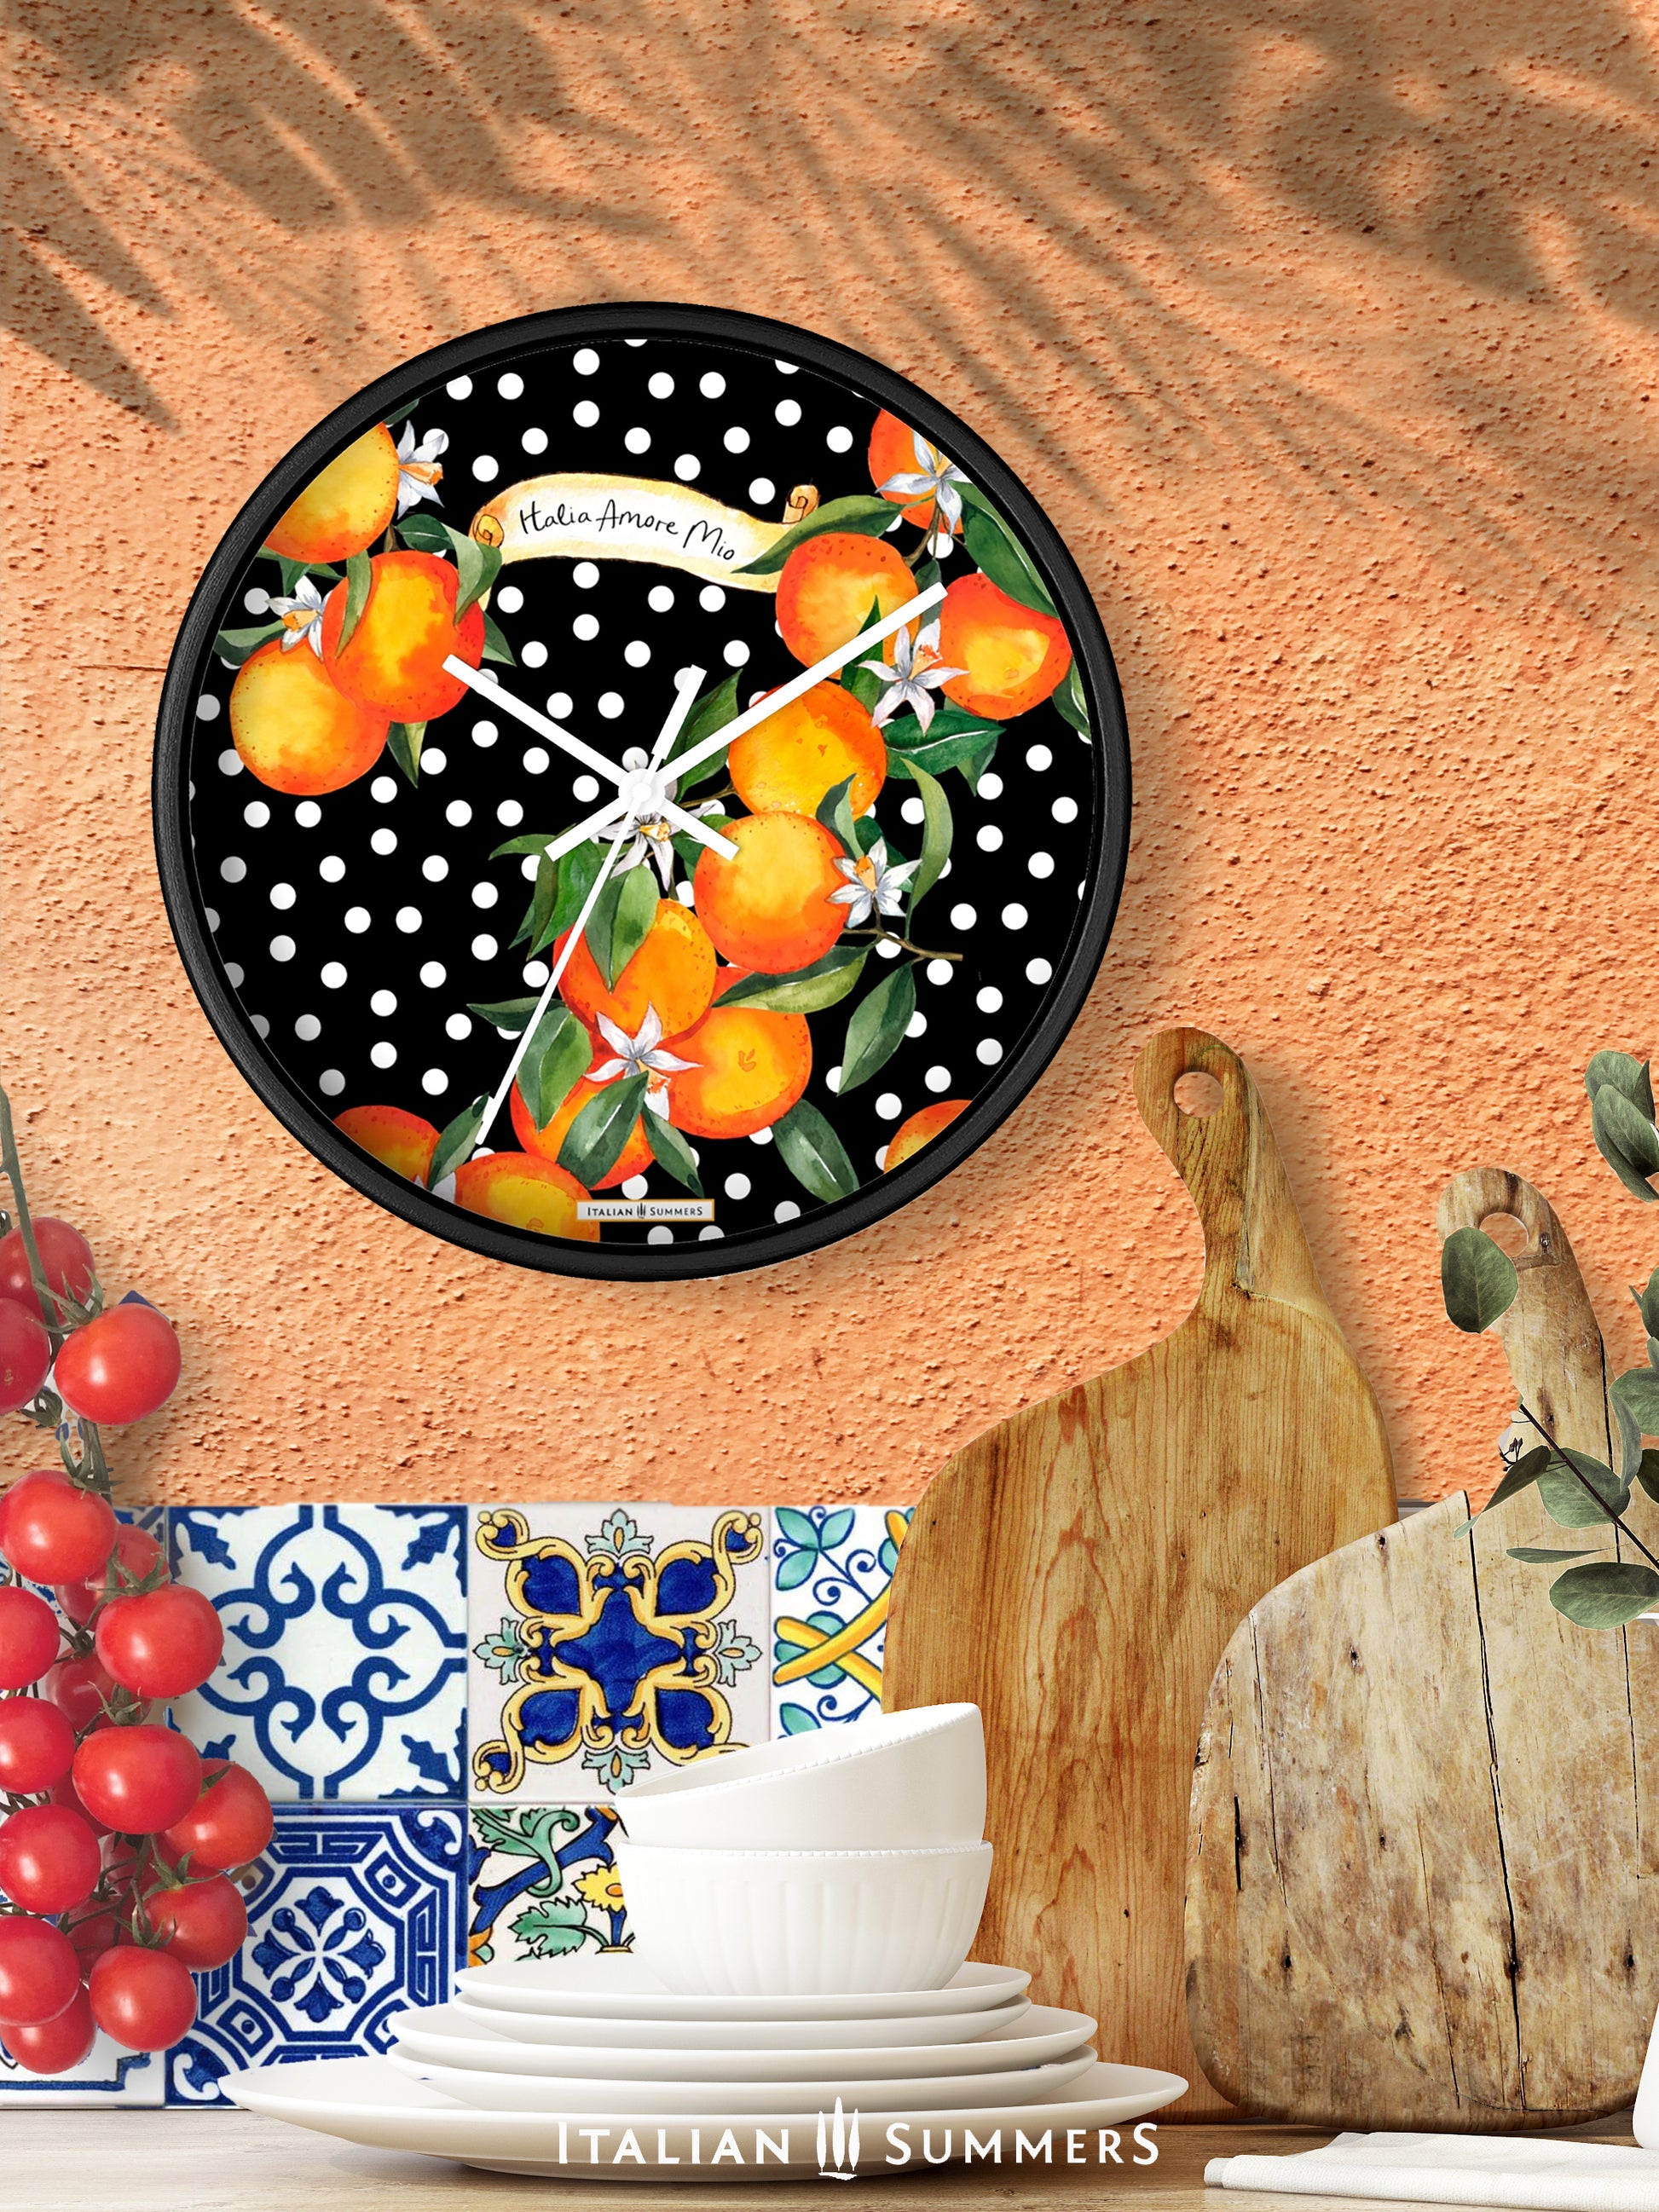 Wall clock SICILIAN GARDEN bursts with color, from the happy white polka dots to the lively orange blossoms. The timeless phrase 'Italia Amore Mio' adds a meaningful touch of love. Designed and sold by Italian Summers